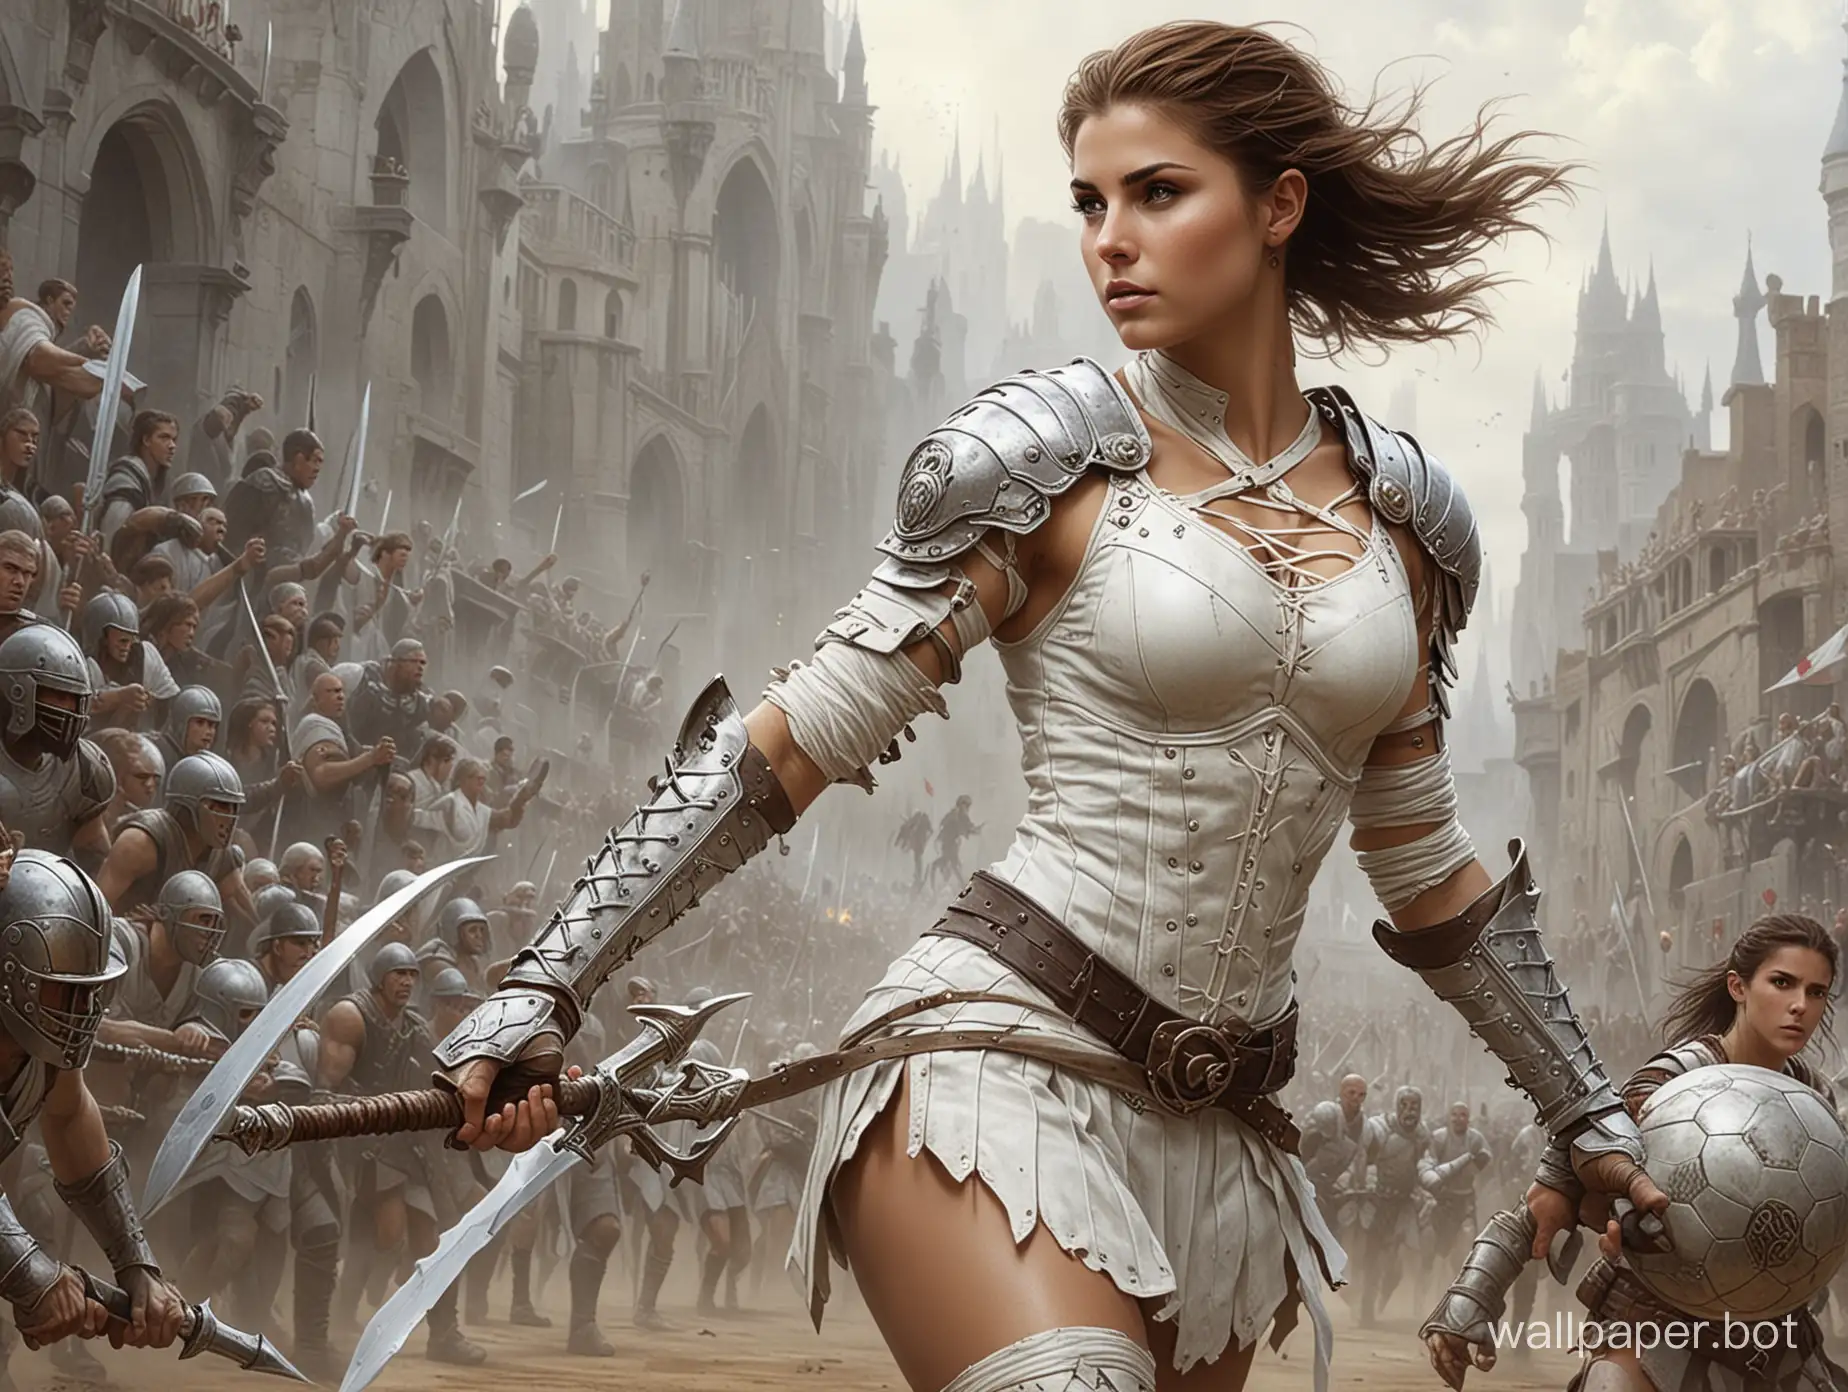 Soccer  Alex Morgan  25 years old  short haircut    beautiful half-orc gladiator  in white armor with a ball   lace-up breeches  in half-turn  style  Luis Royo